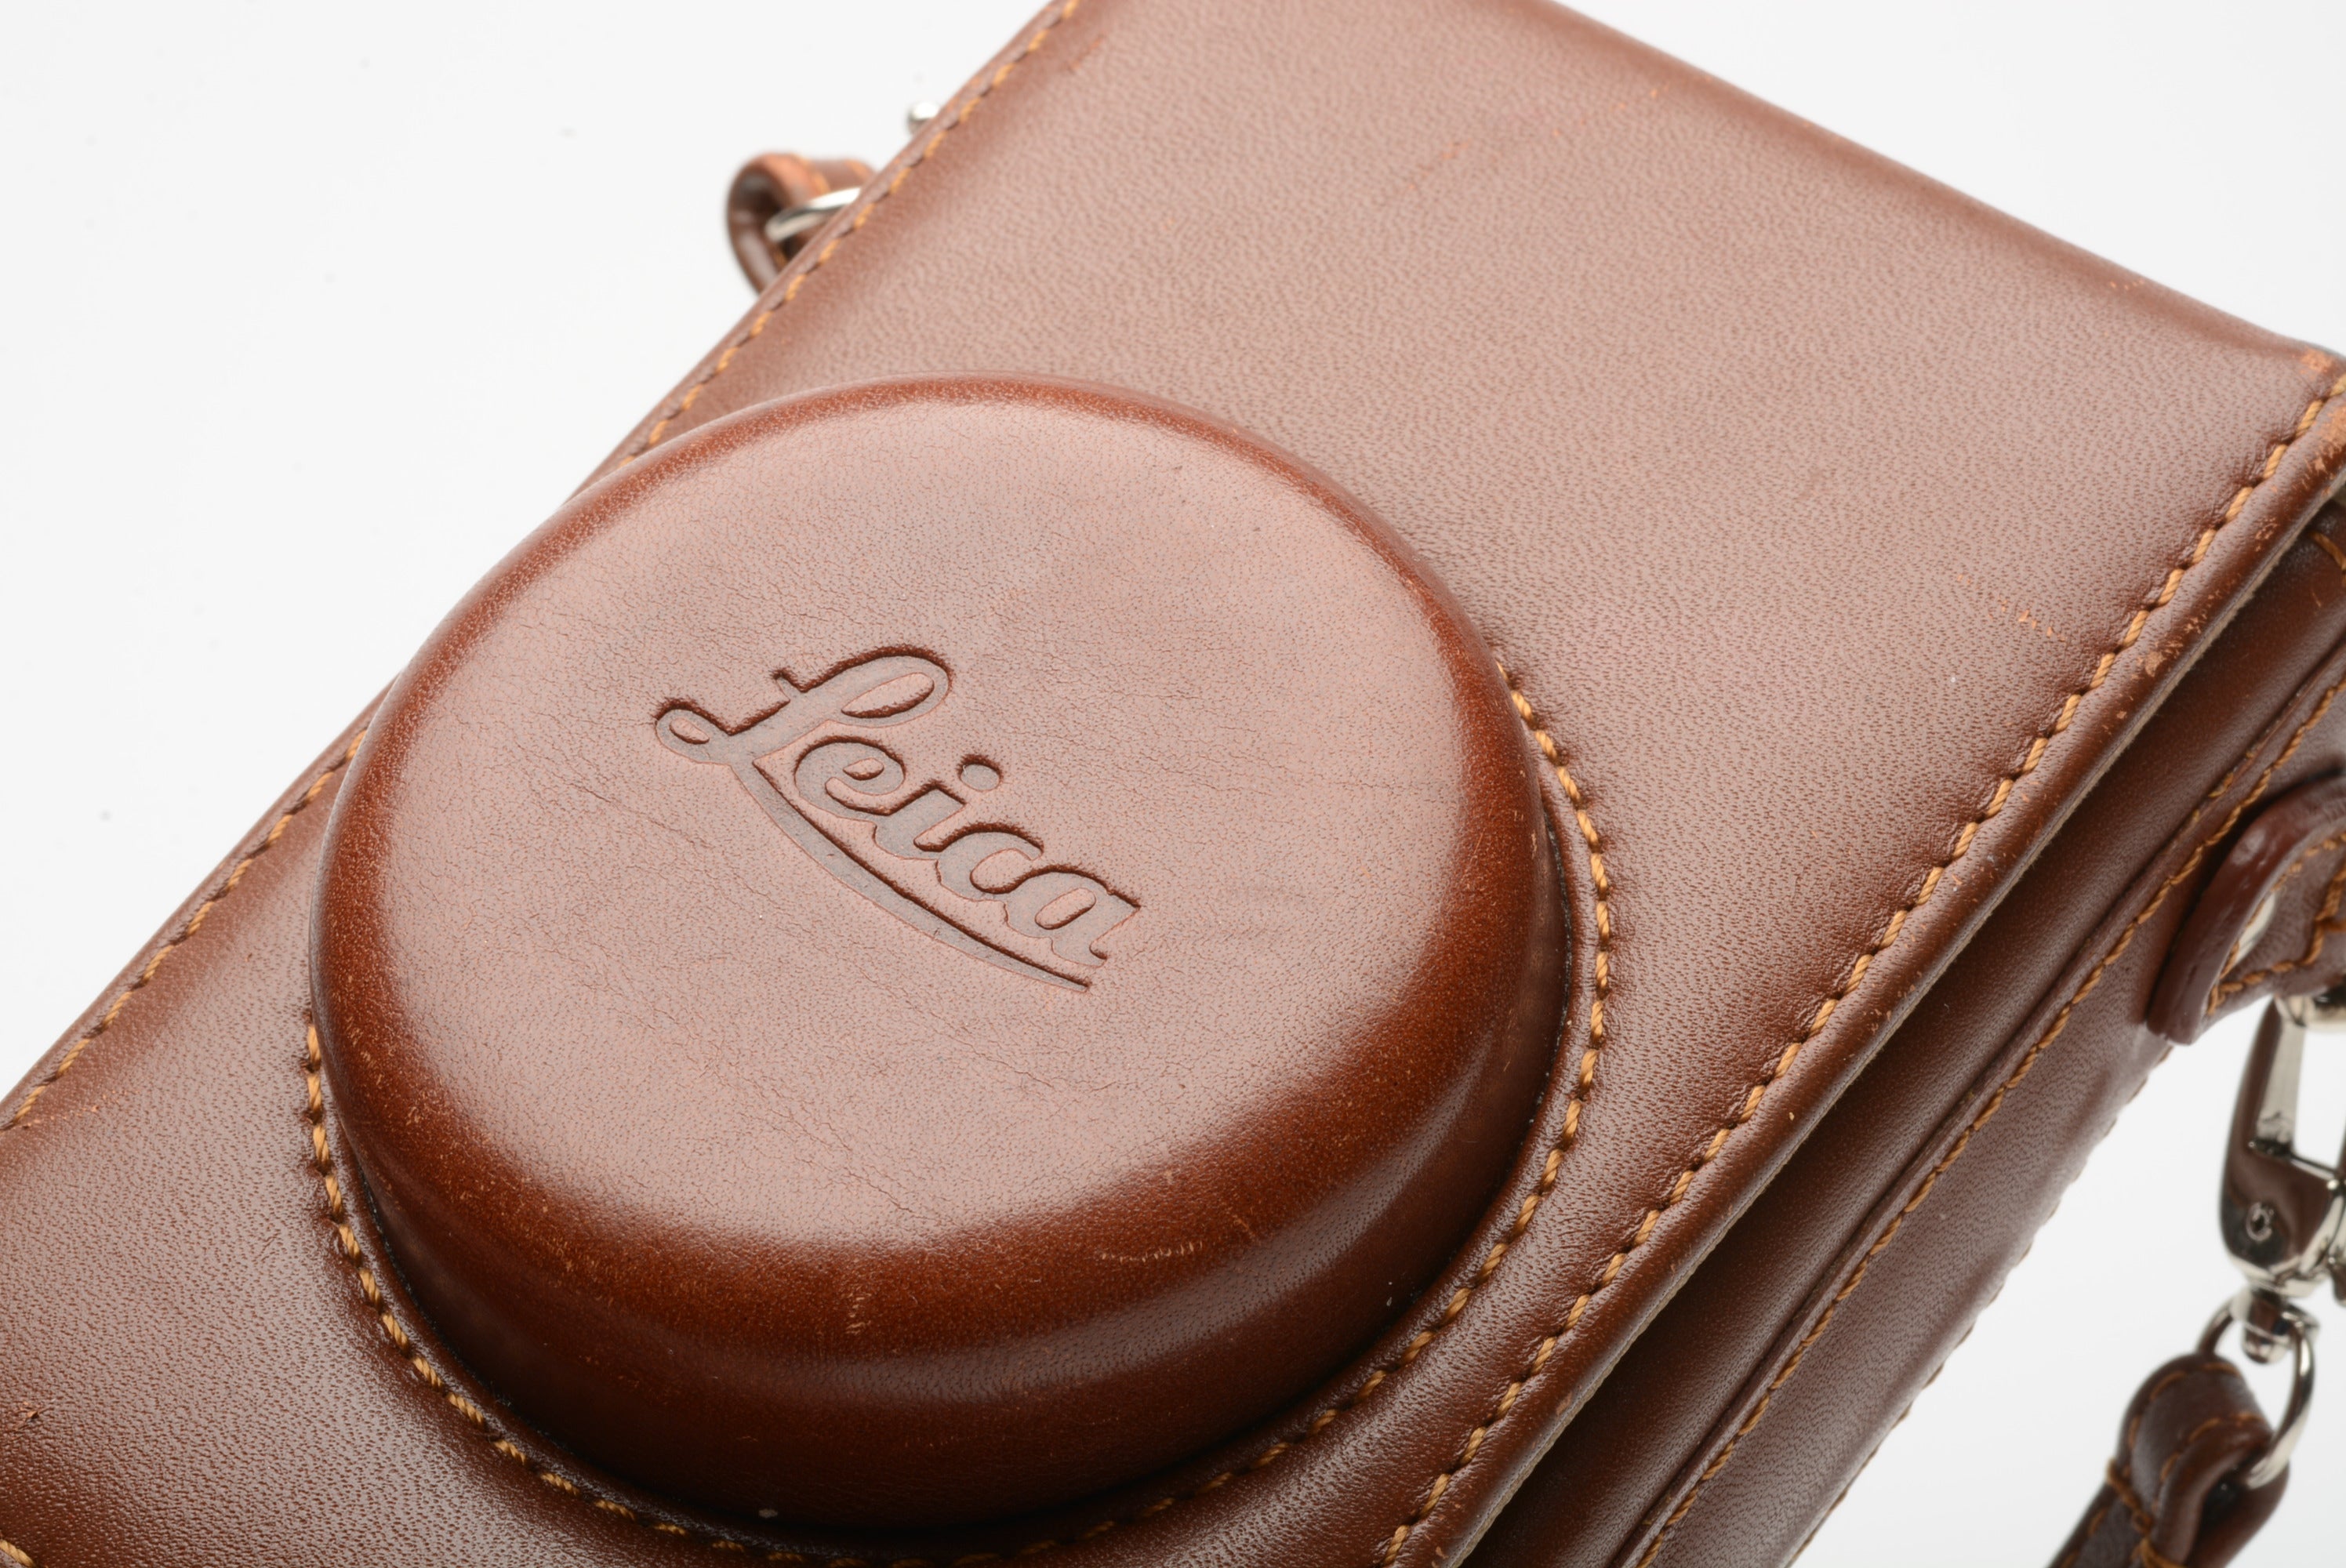 Leica leather D-Lux 4 Classic Case (Brown), very nice